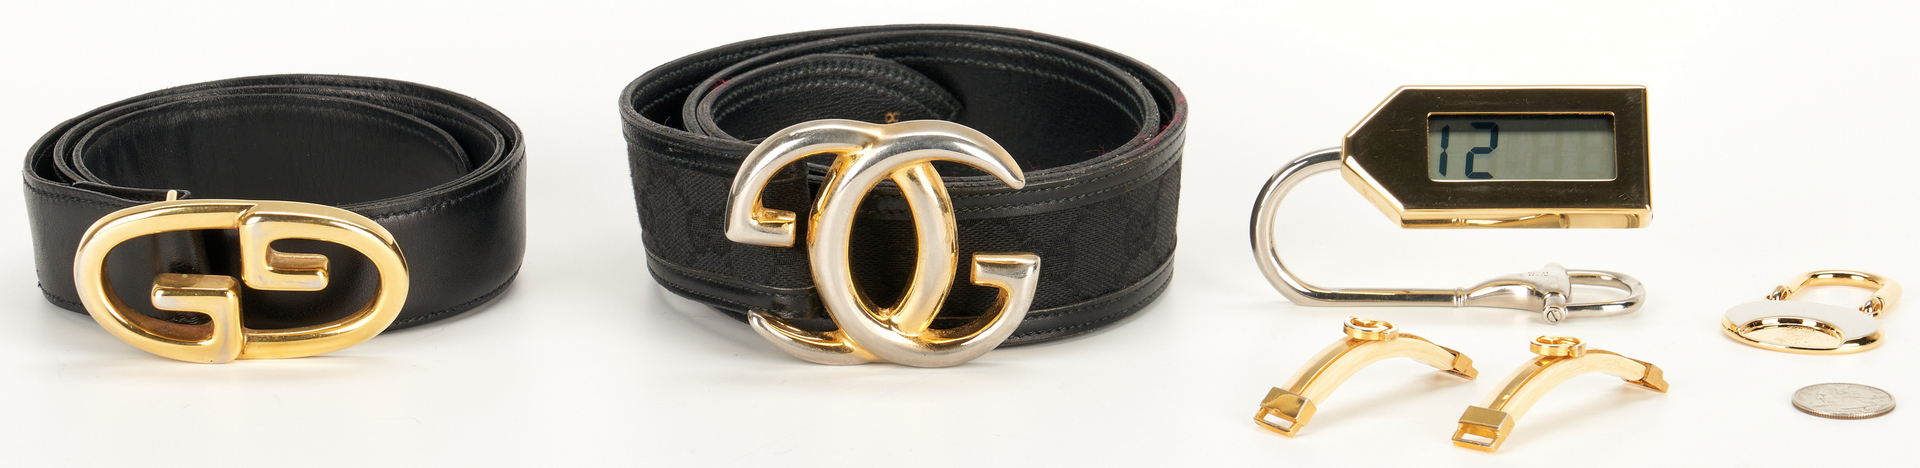 Lot 1028: 8 Gucci items, incl. belts, promotional items